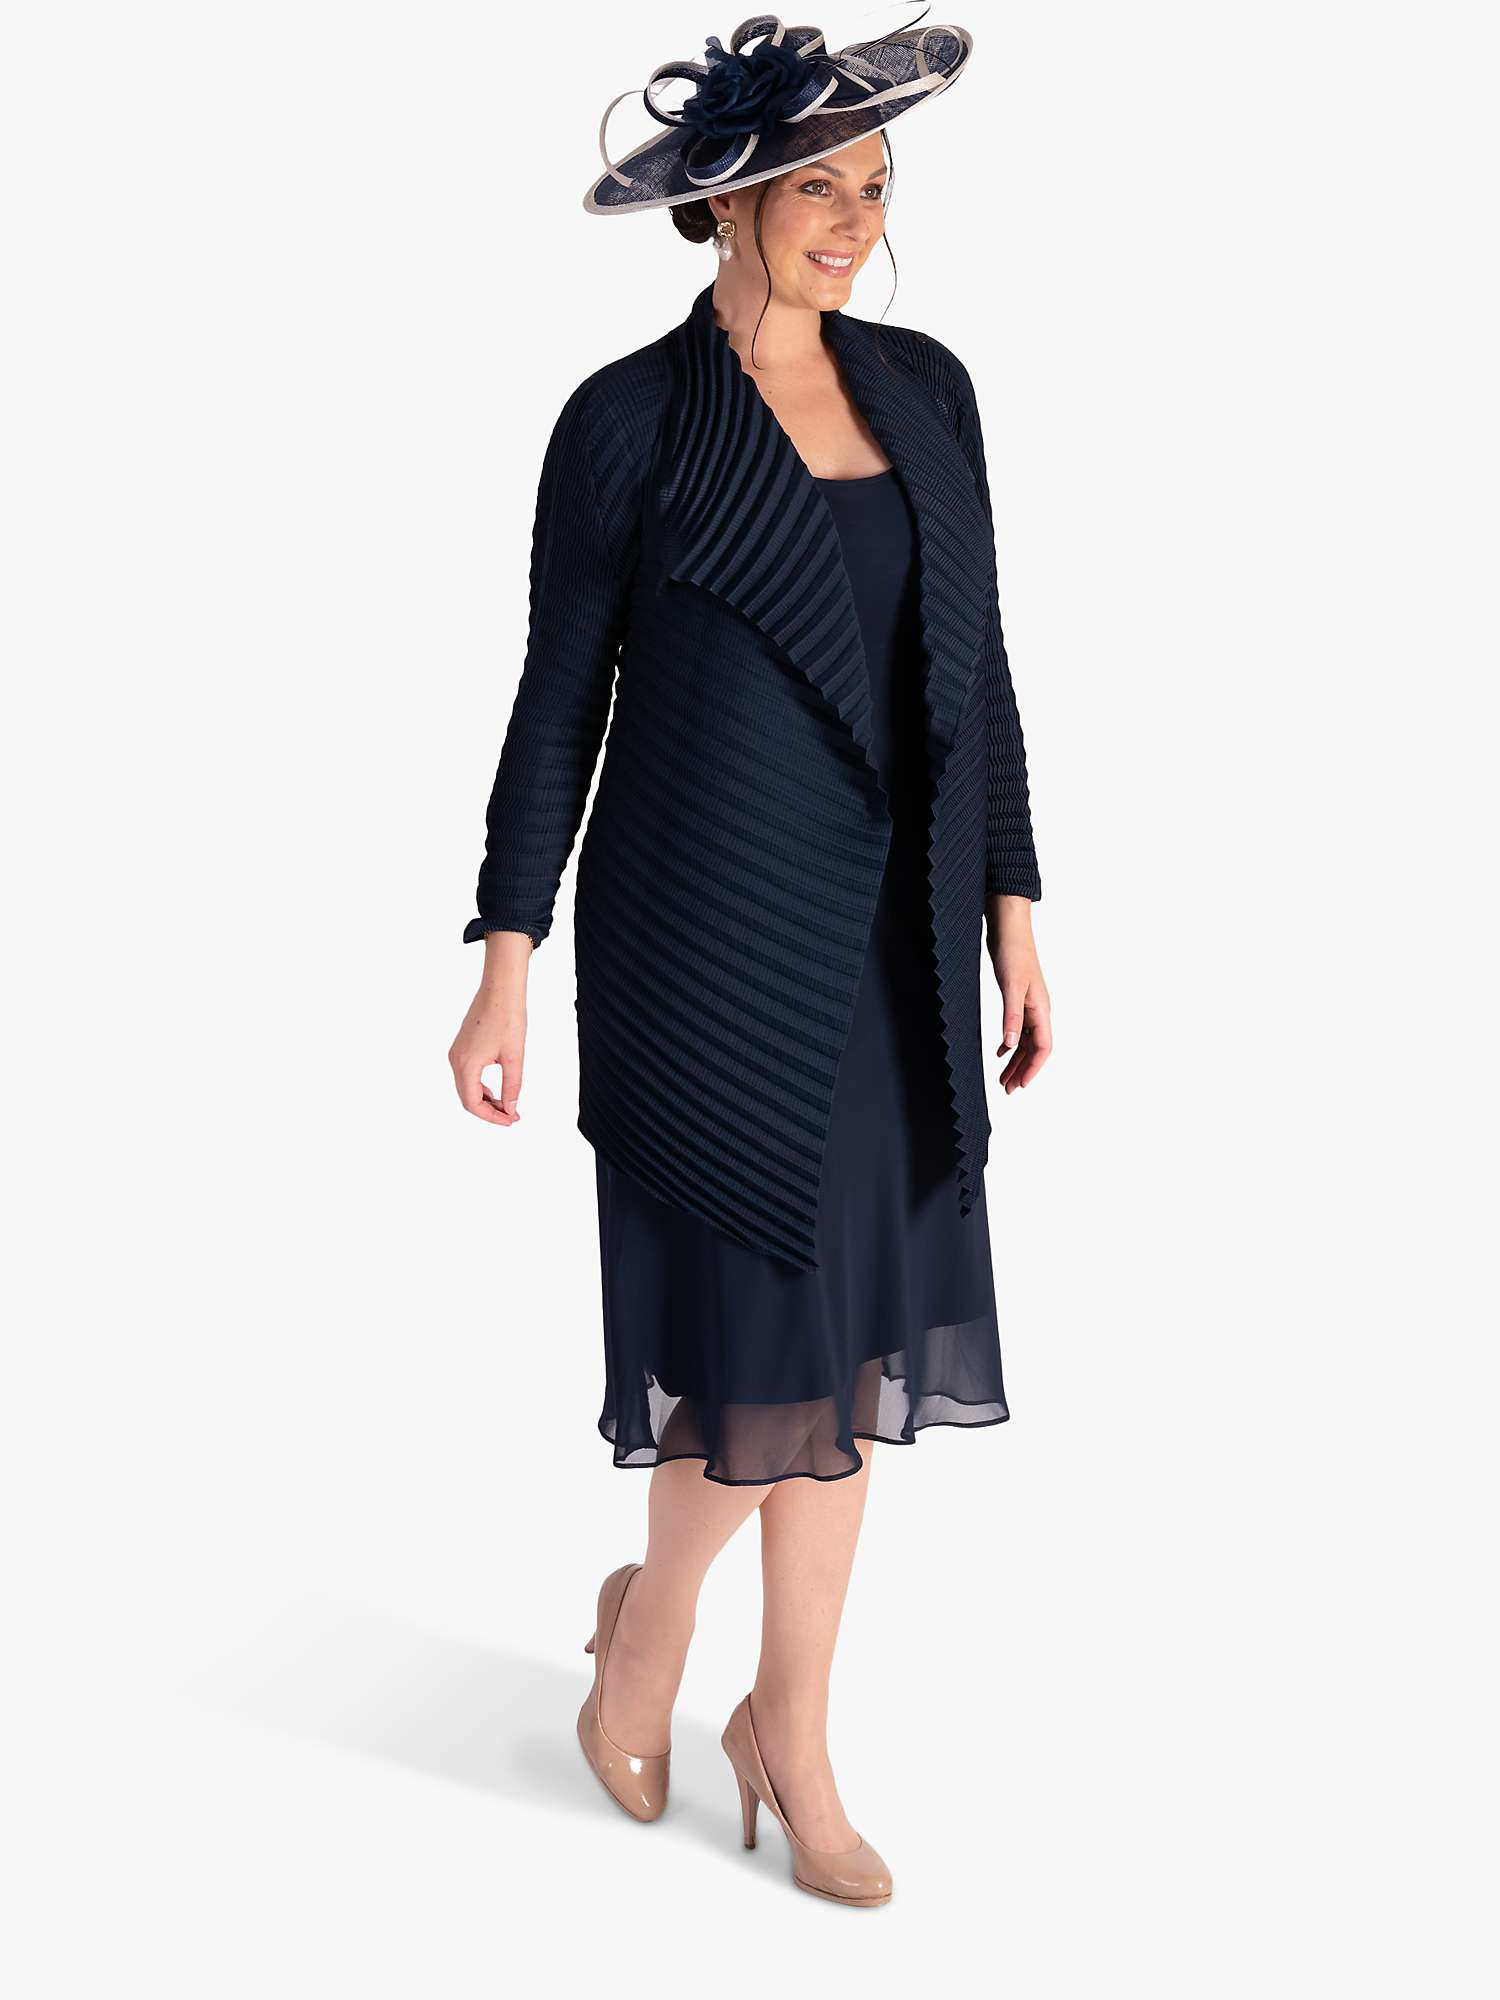 Buy chesca Concertina Pleated Jacket Online at johnlewis.com